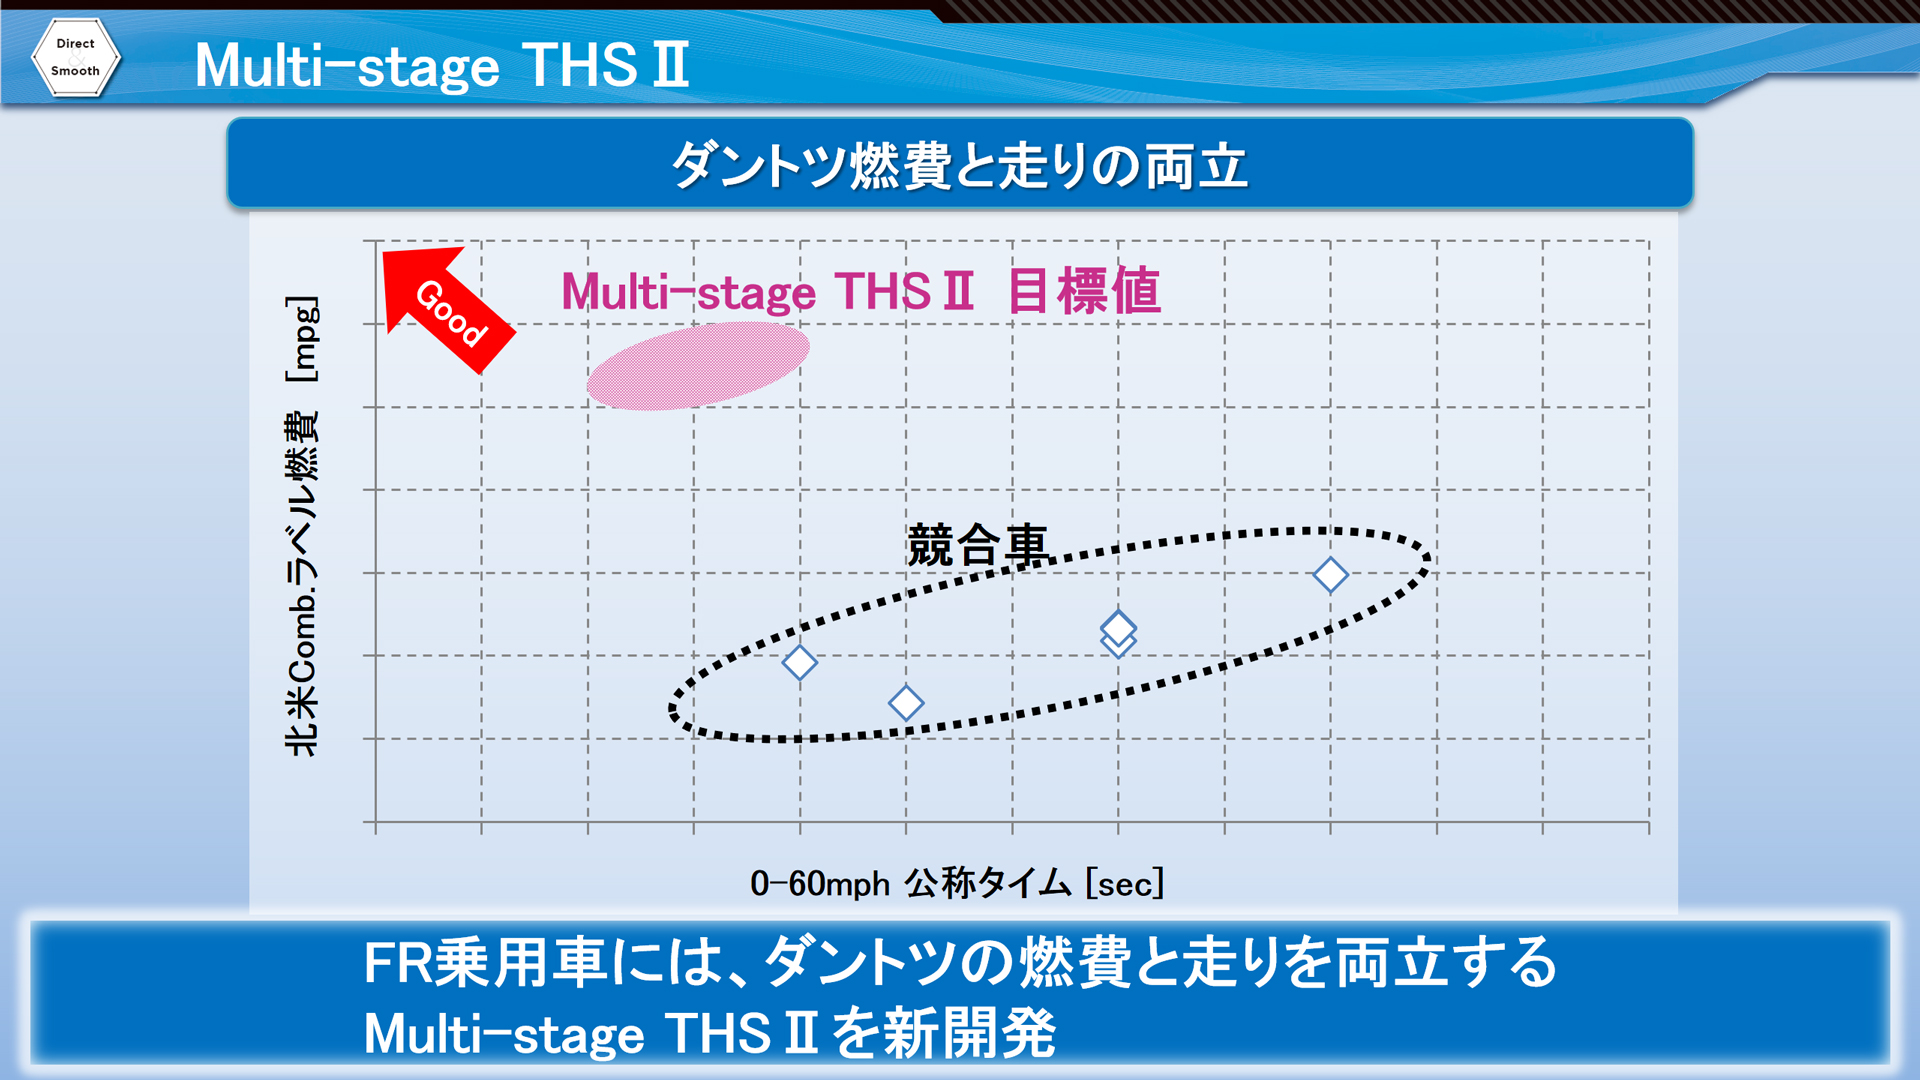 Multi-stage THSⅡ